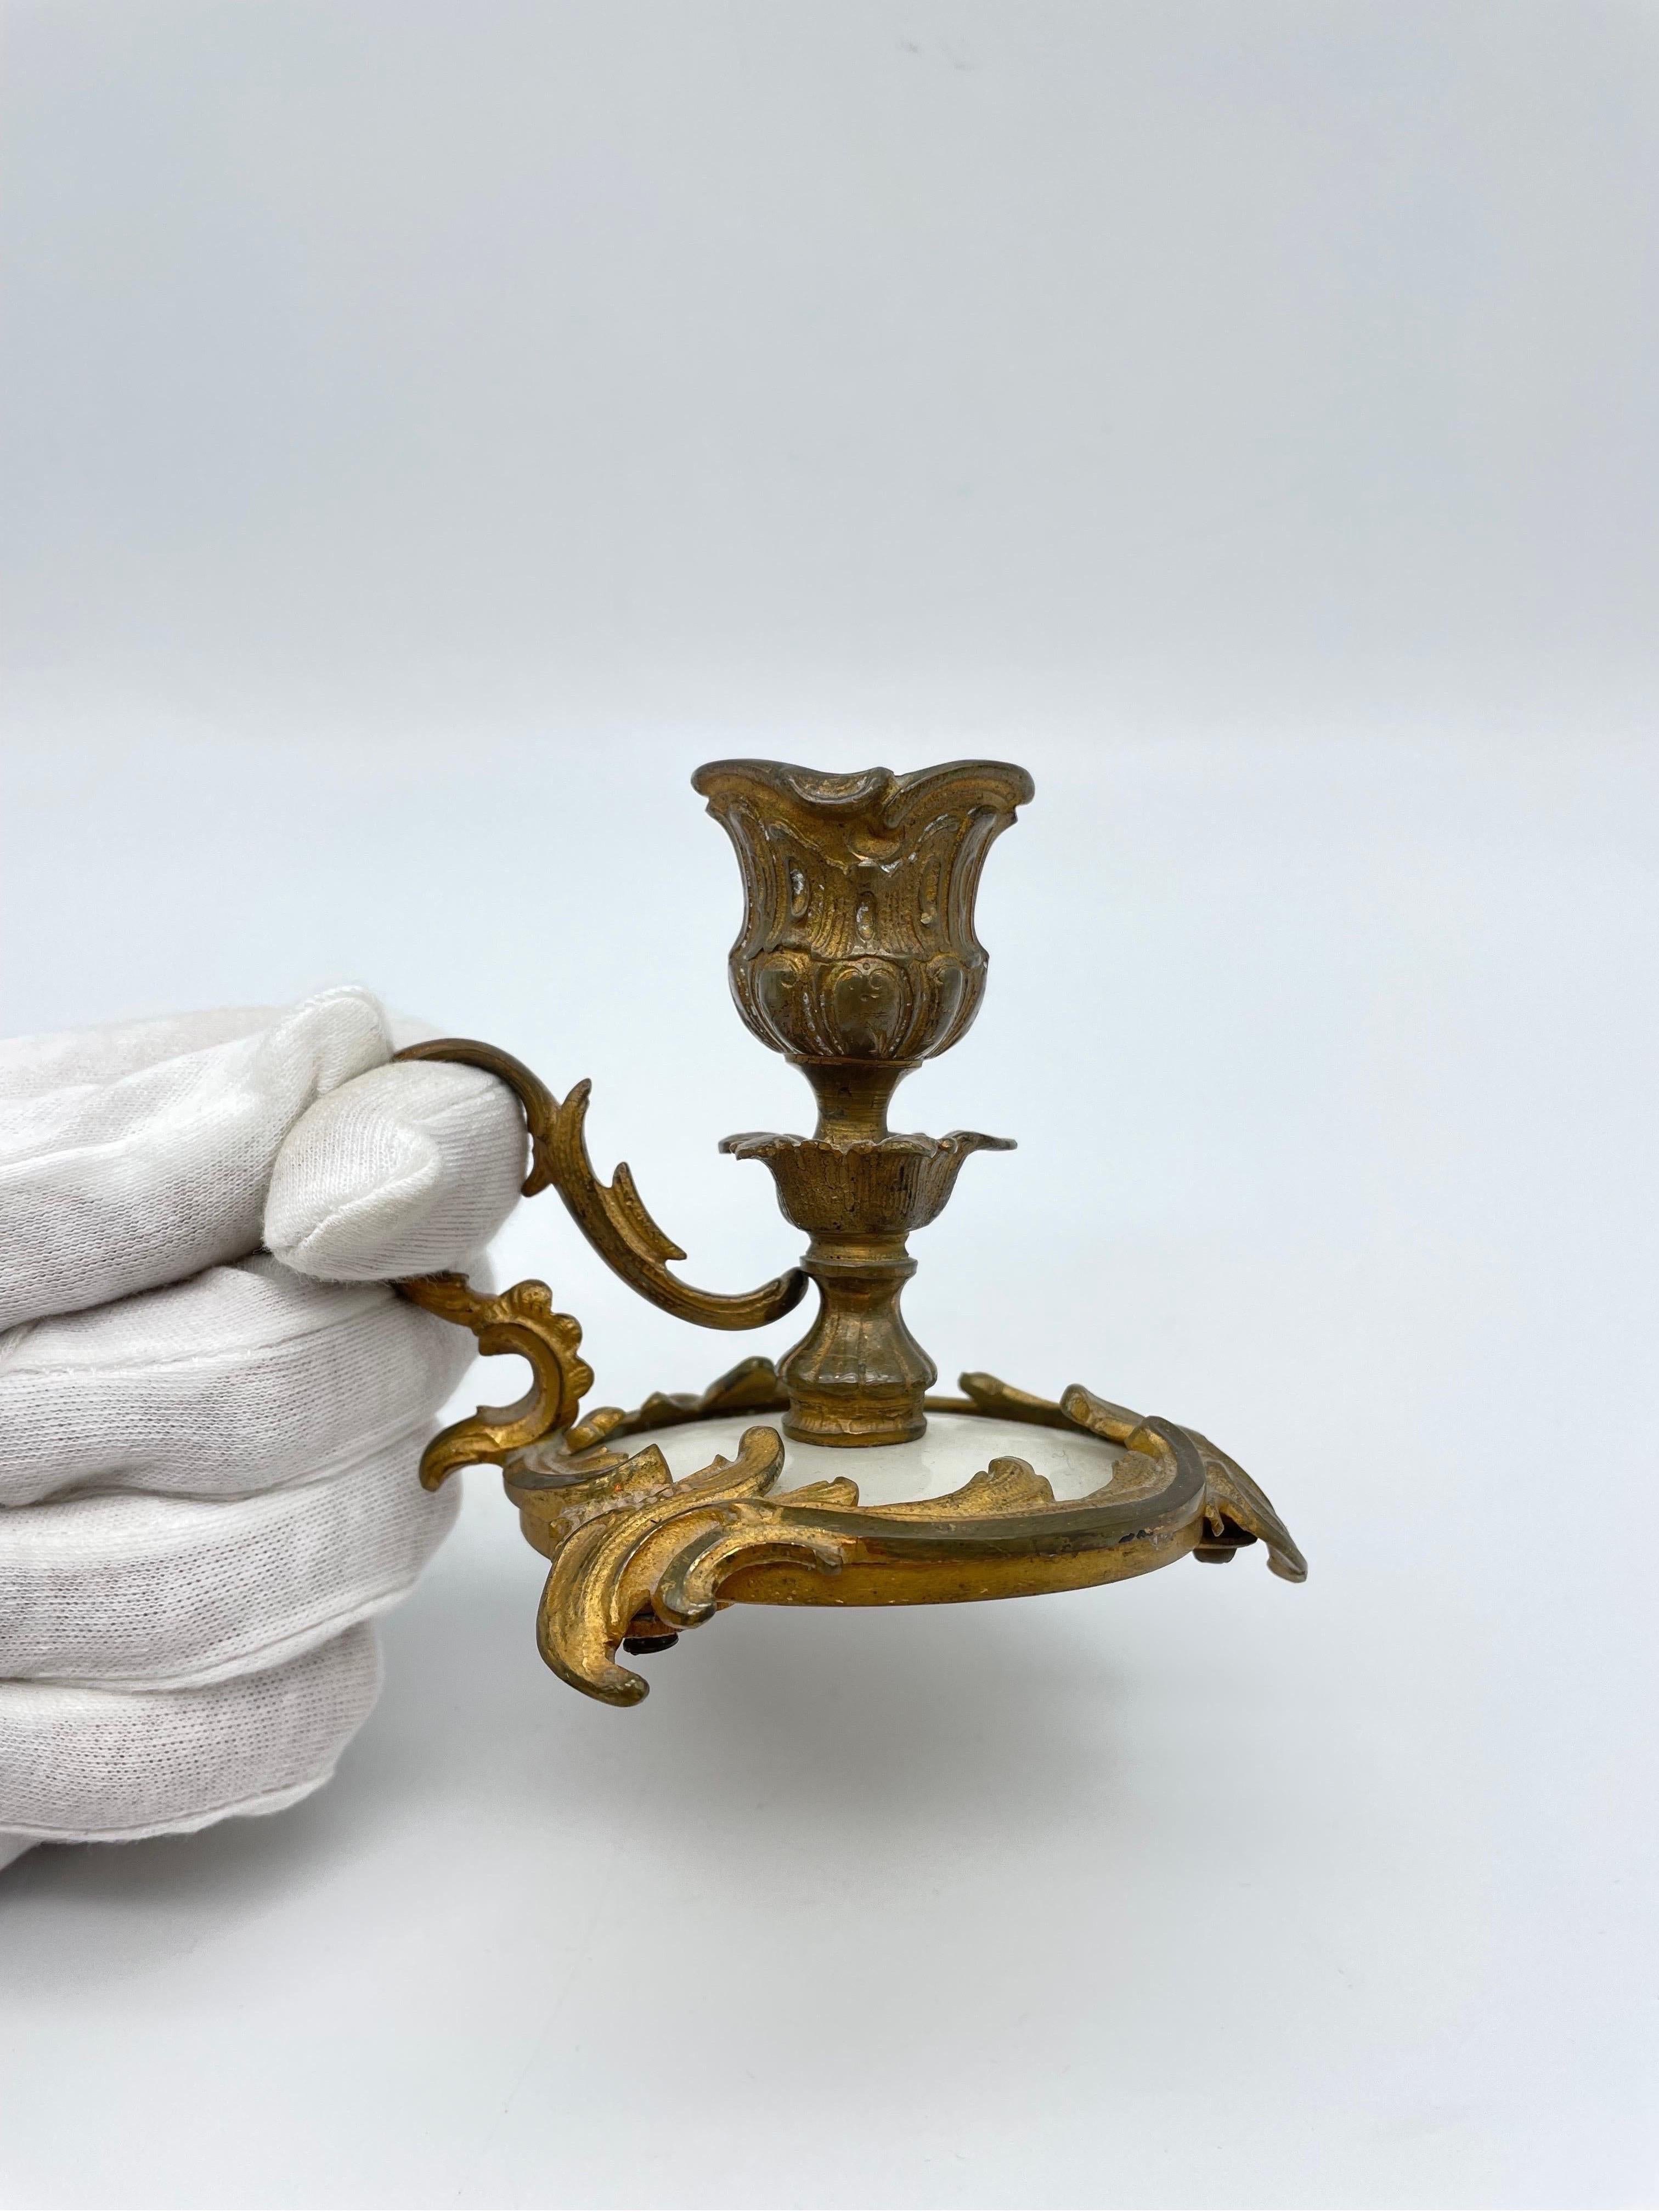 Noble Neo Rococo candlestick, gilded bronze, around 1900

Candlestick, solid bronze, finely chased and gilded. Very high quality processed. Alabaster base standing on three rocaillie feet.France around 1900